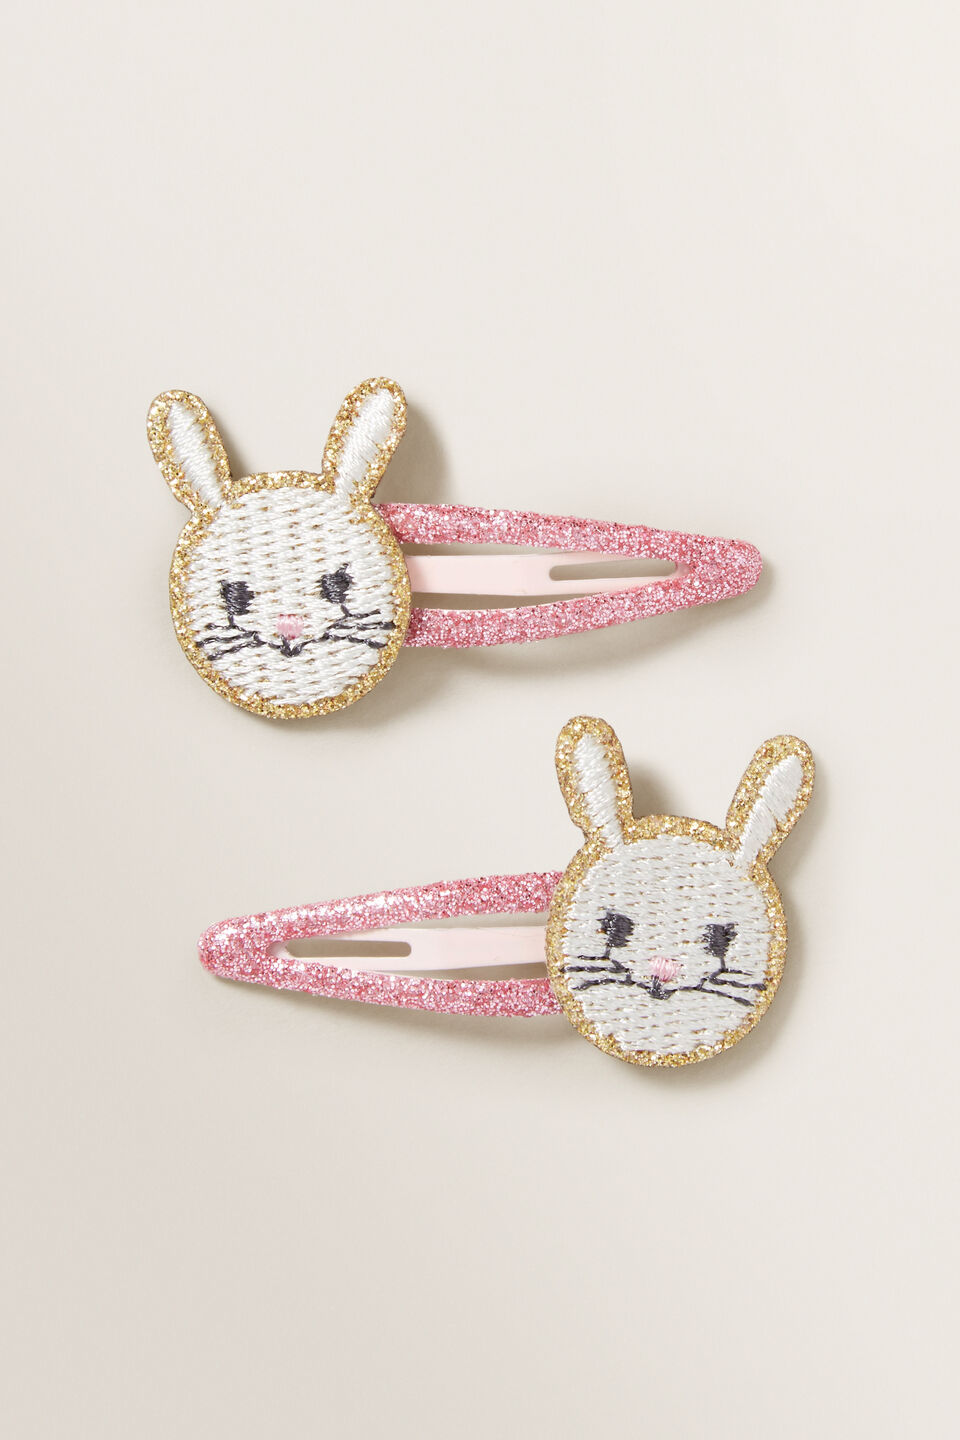 Embroidered Bunny Snaps  